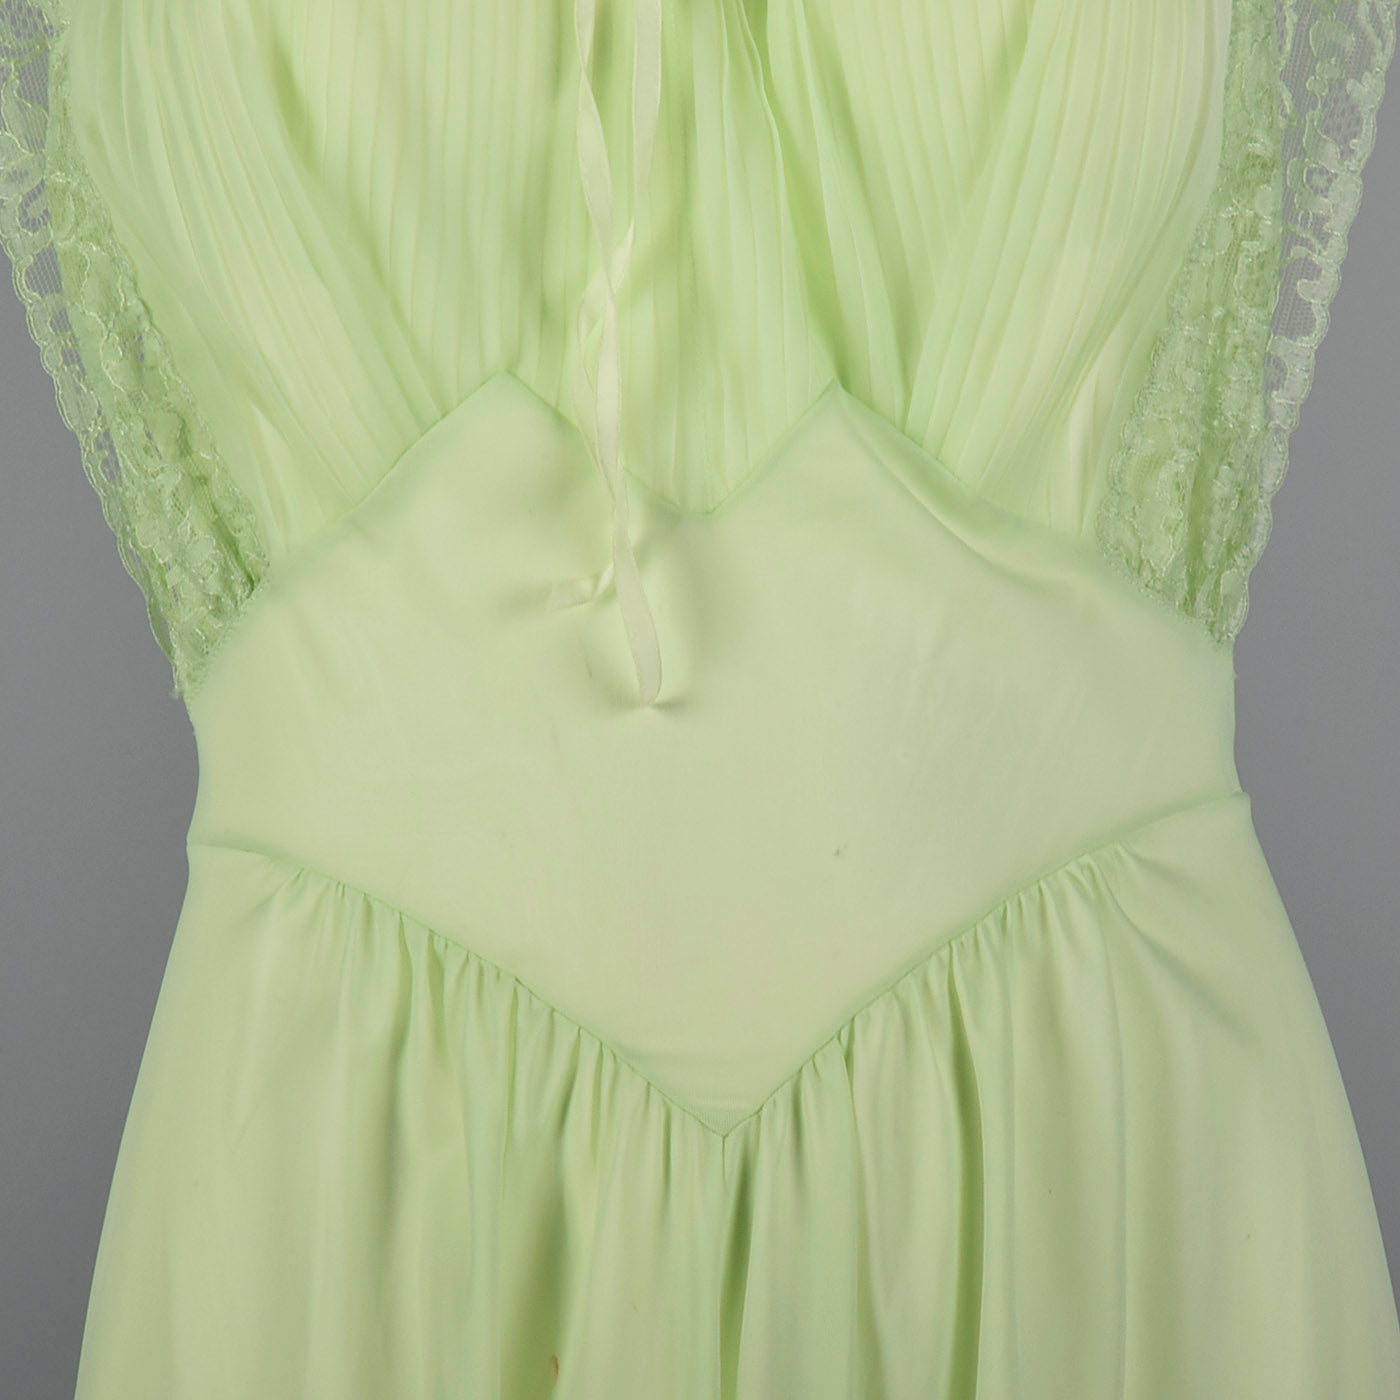 1950s Vanity Fair Green Nightgown with Crystal Pleat Bust